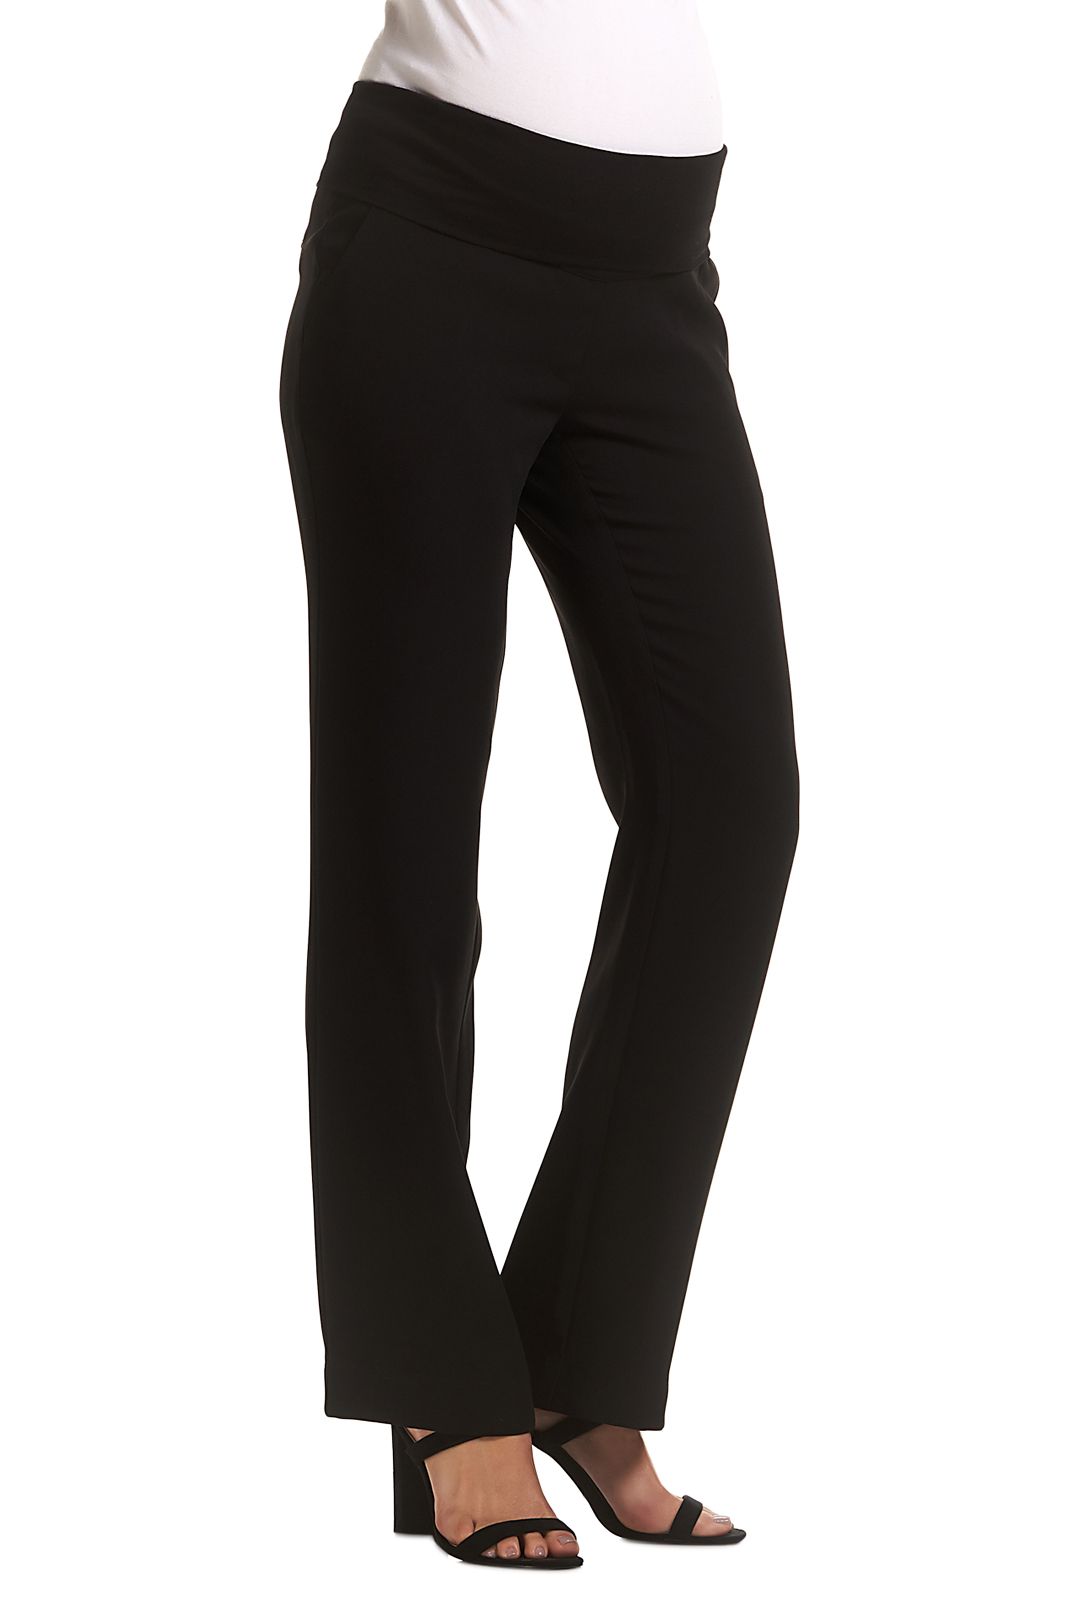 Classic Work Pants in Black Haust by Soon Maternity for Hire | GlamCorner